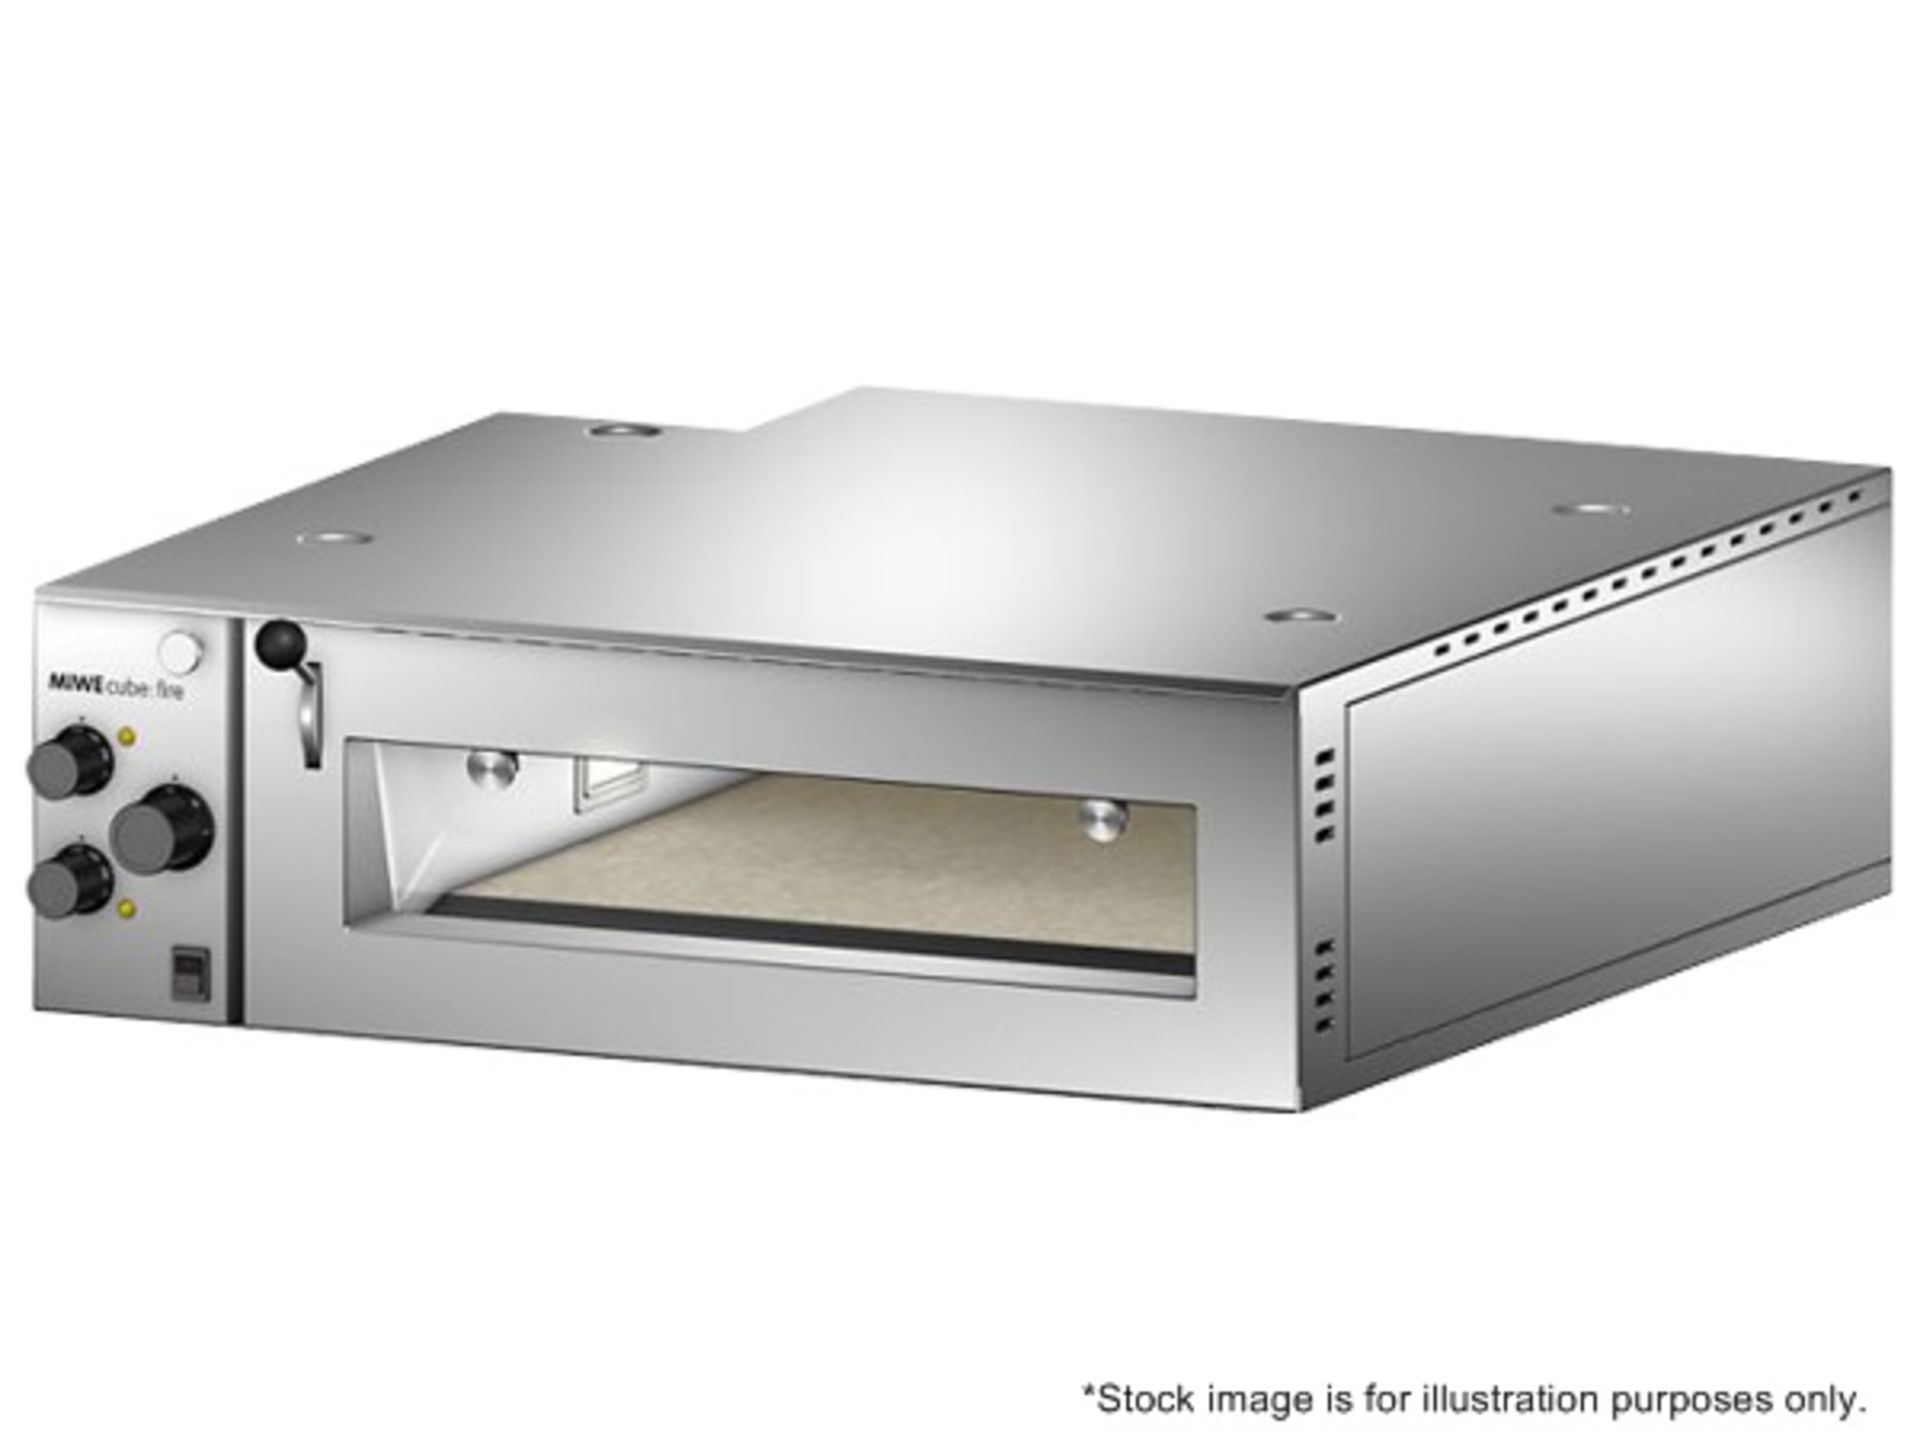 1 x MIWE cube:fire High Temperature Oven With Stone Plate - CL350 - Ref211 - Location: Altrincham